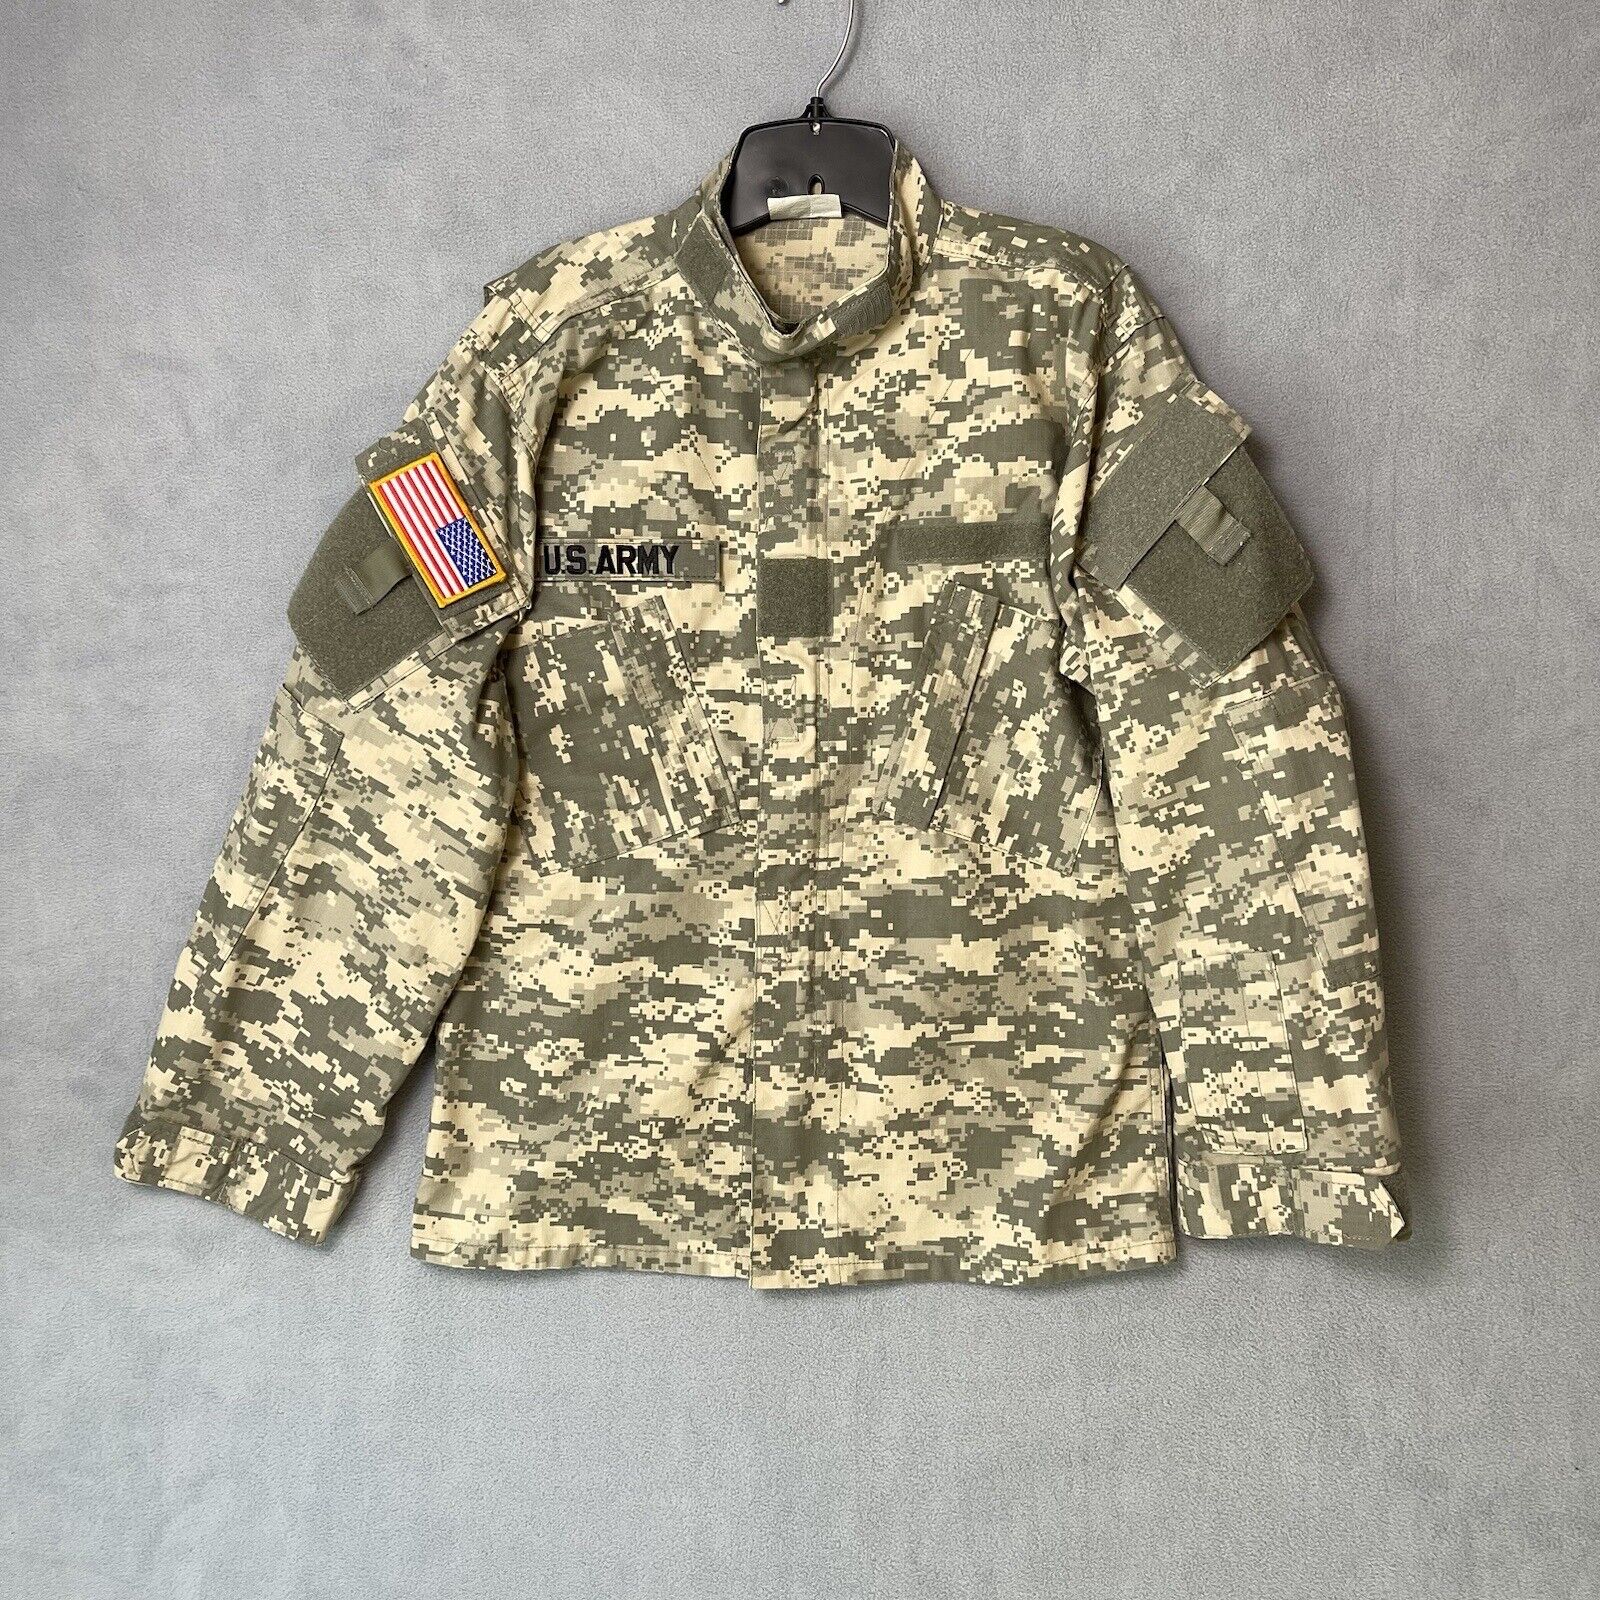 Rothco Ultra Force Combat Shirt XS Army Camouflage Combat Flag Patch Jacket USA